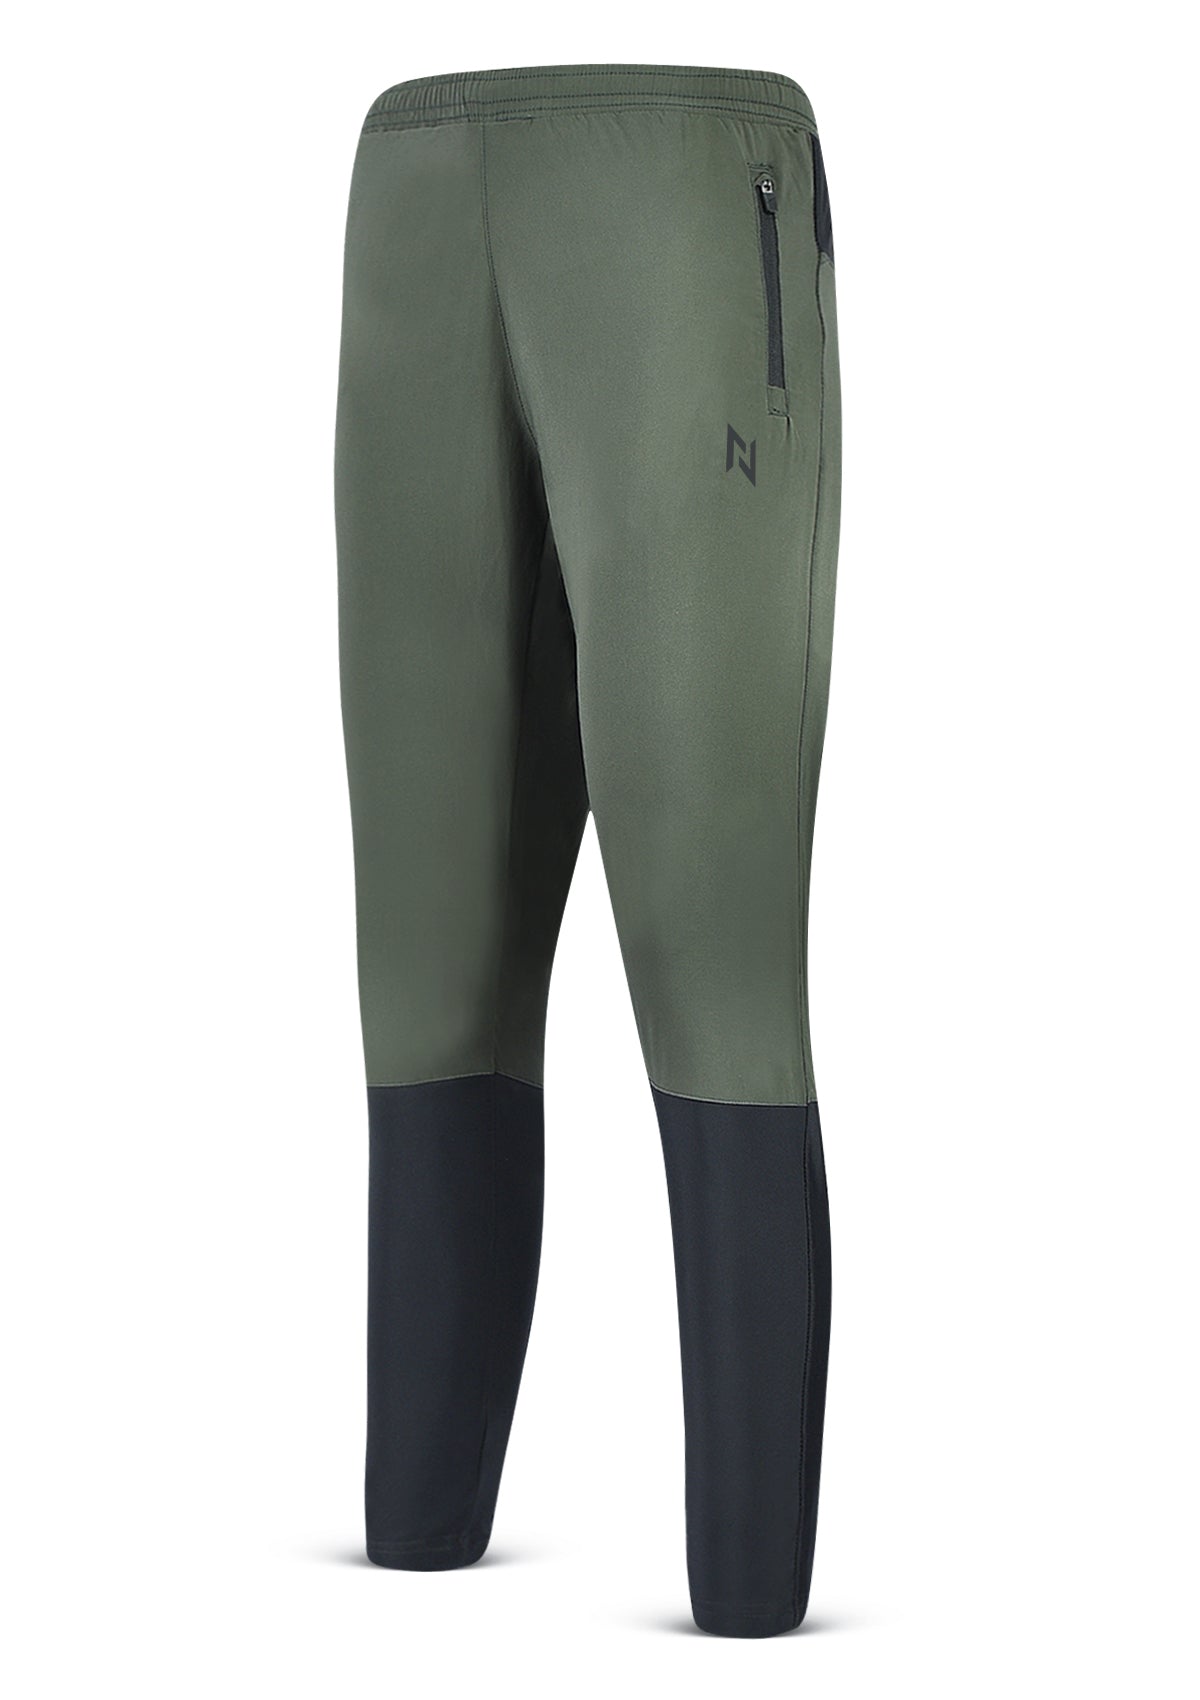 HYBRID TROUSERS - Nomad Apparel